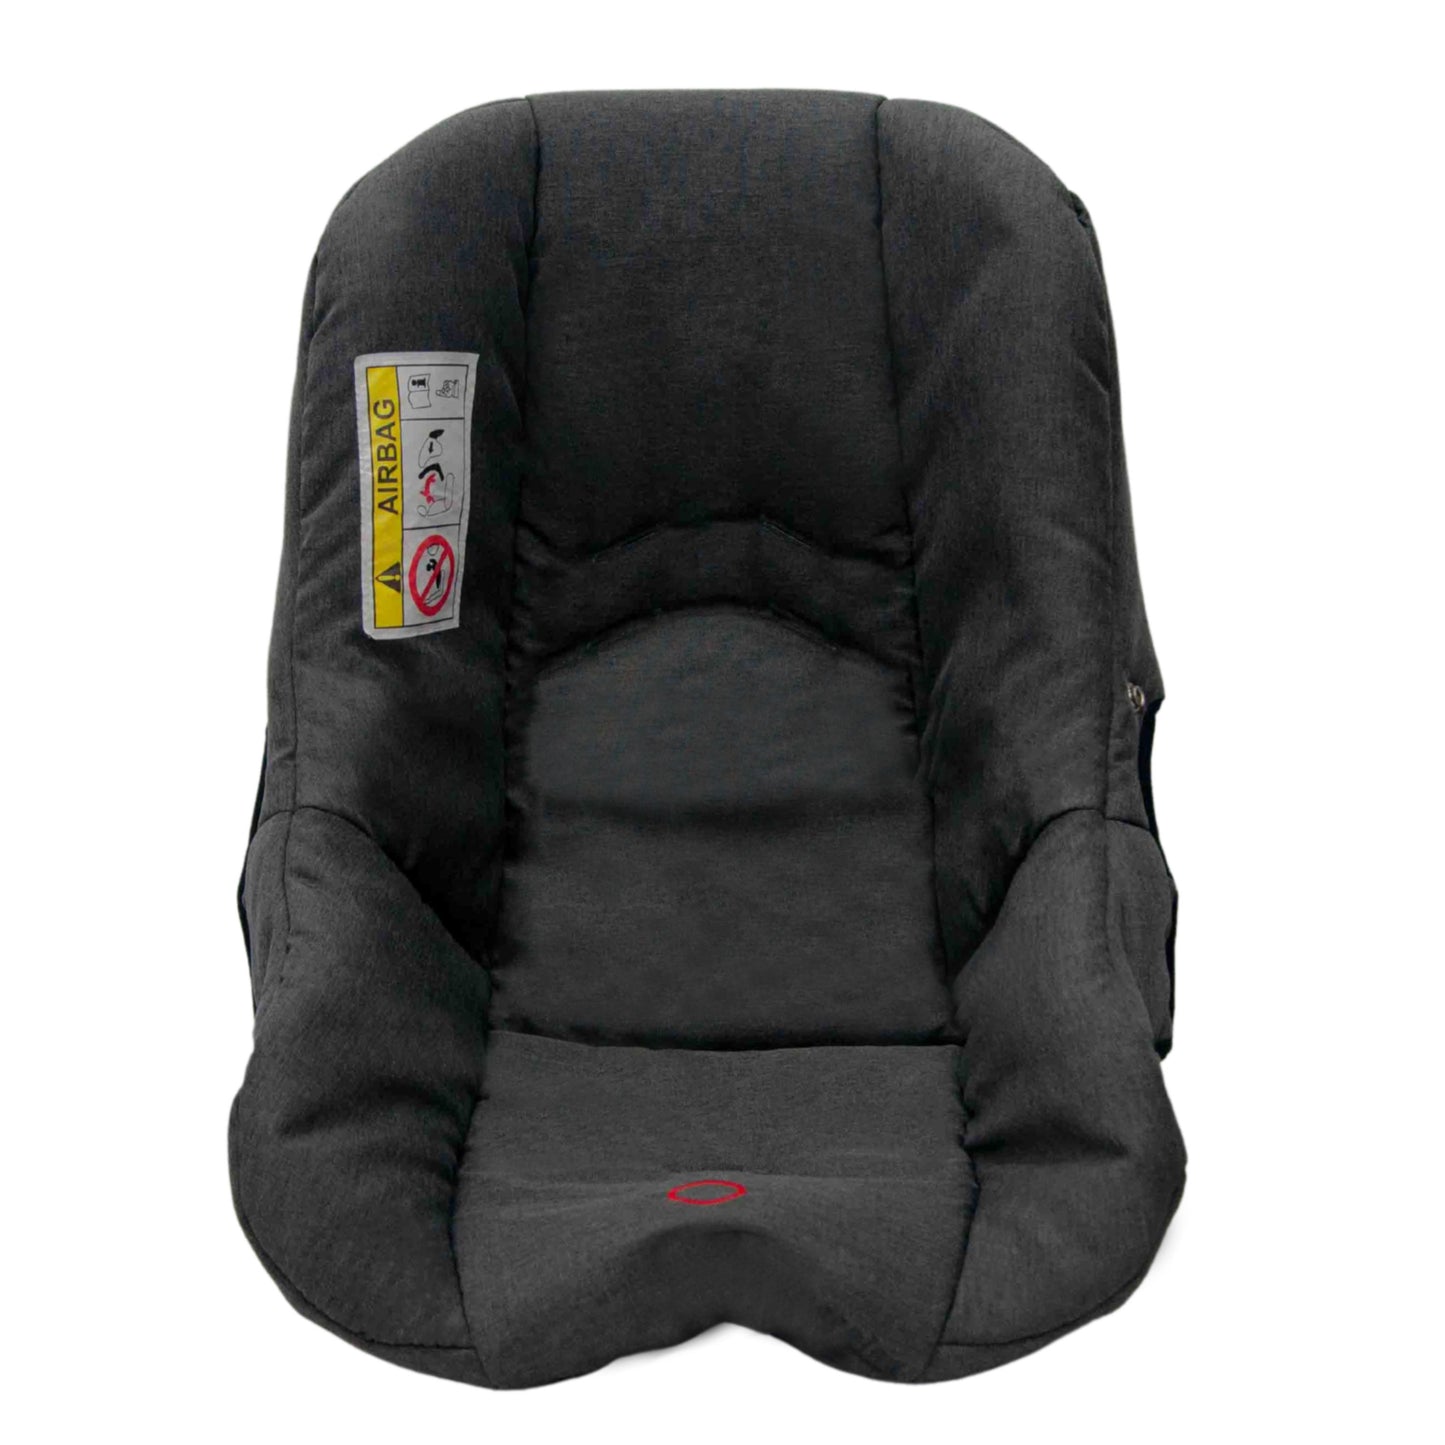 Squizz Carseat Fabric